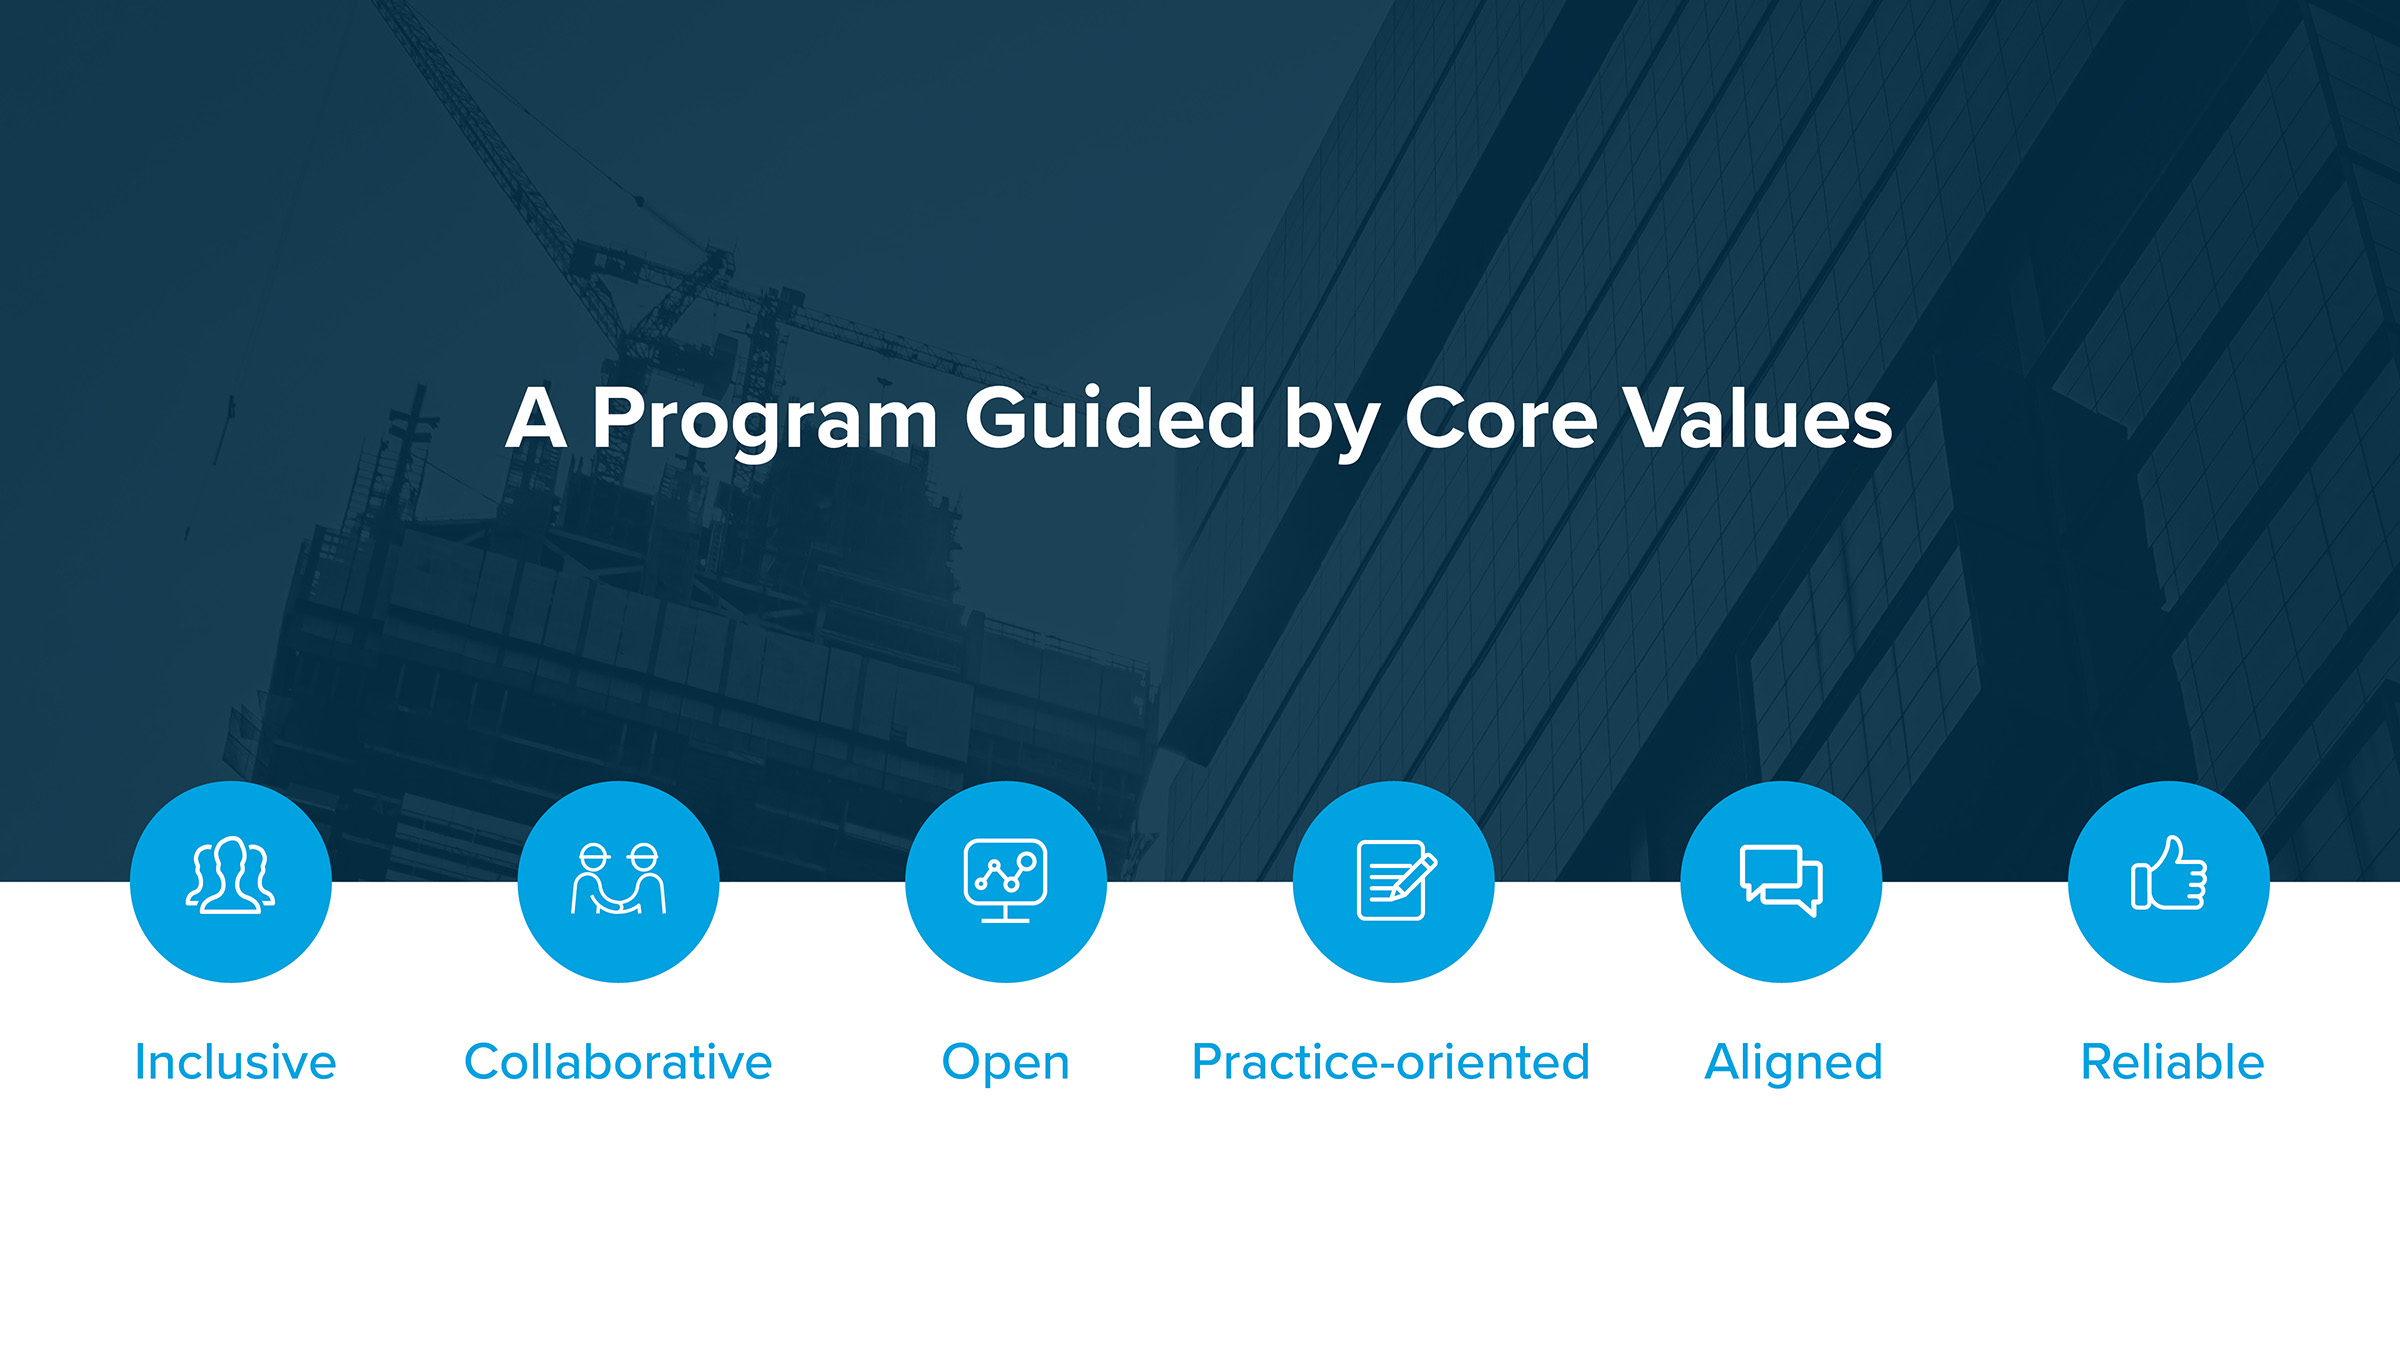 A Program Guided by Core Values - Inclusive, Collaborative, Open, Practice Oriented, Aligned, Reliable